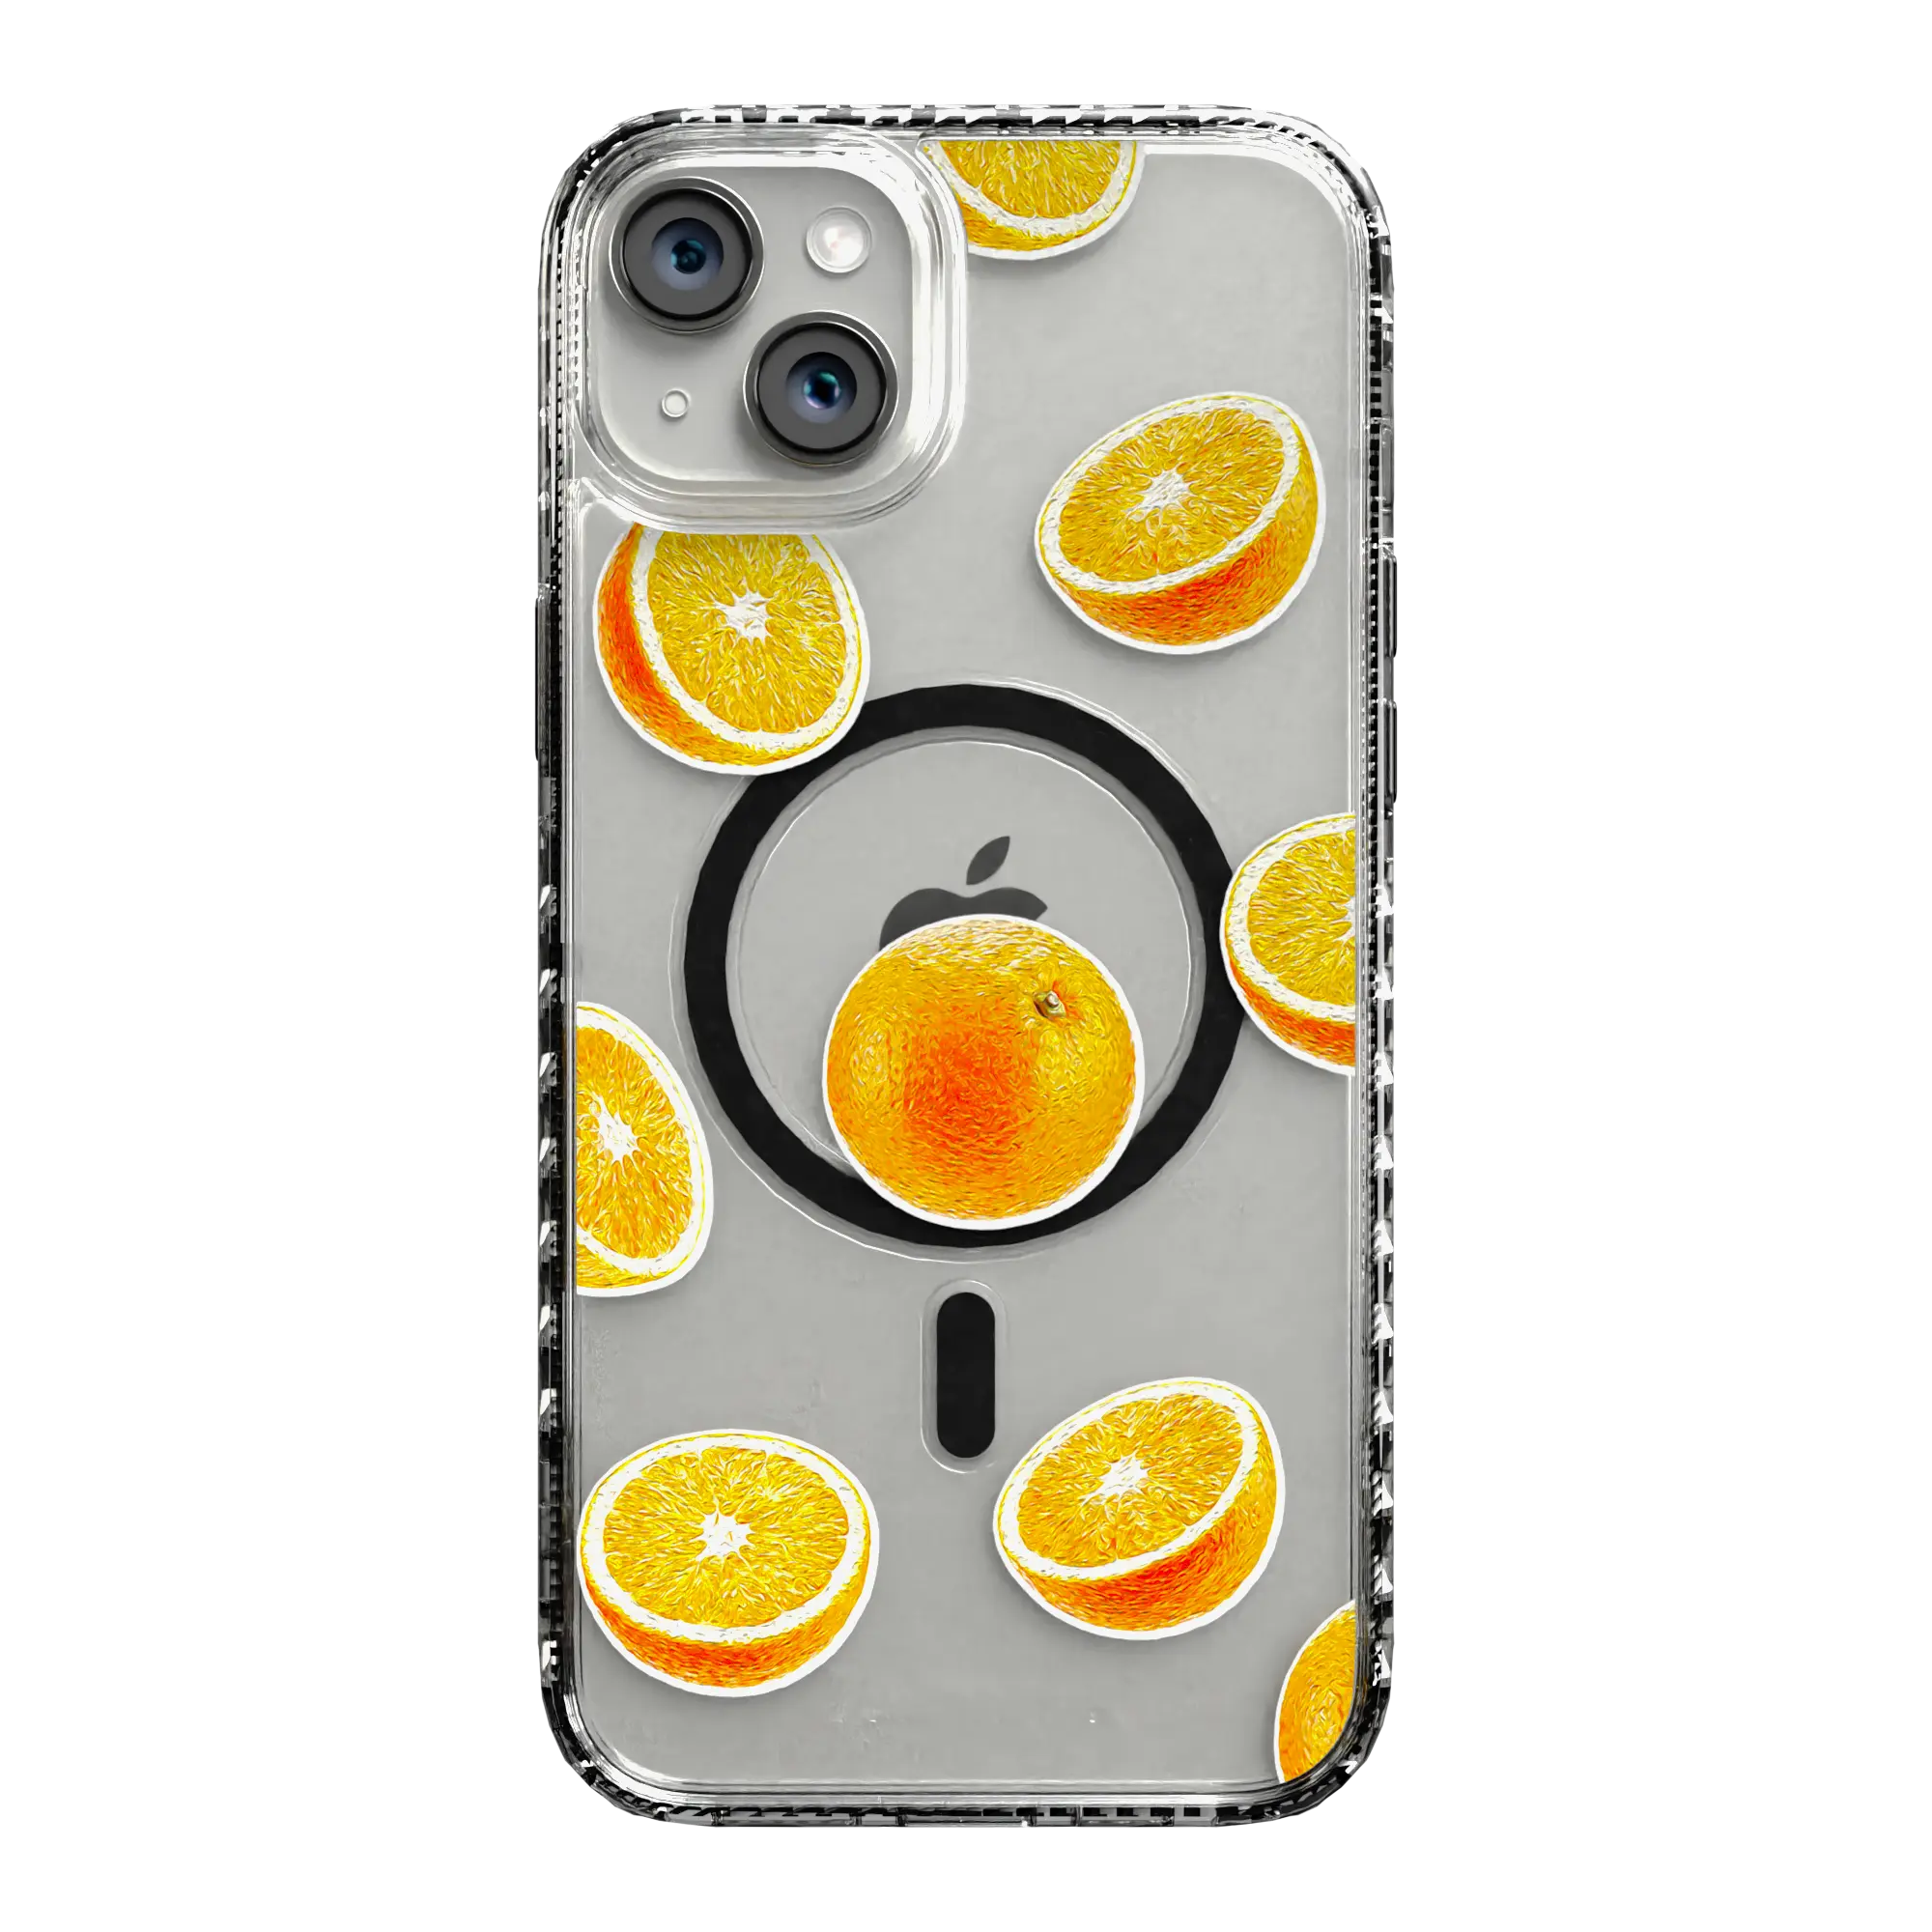 Apple-iPhone-14-Plus-Crystal-Clear Orange Zest | Protective MagSafe Case | Fruits Collection for Apple iPhone 14 Series cellhelmet cellhelmet